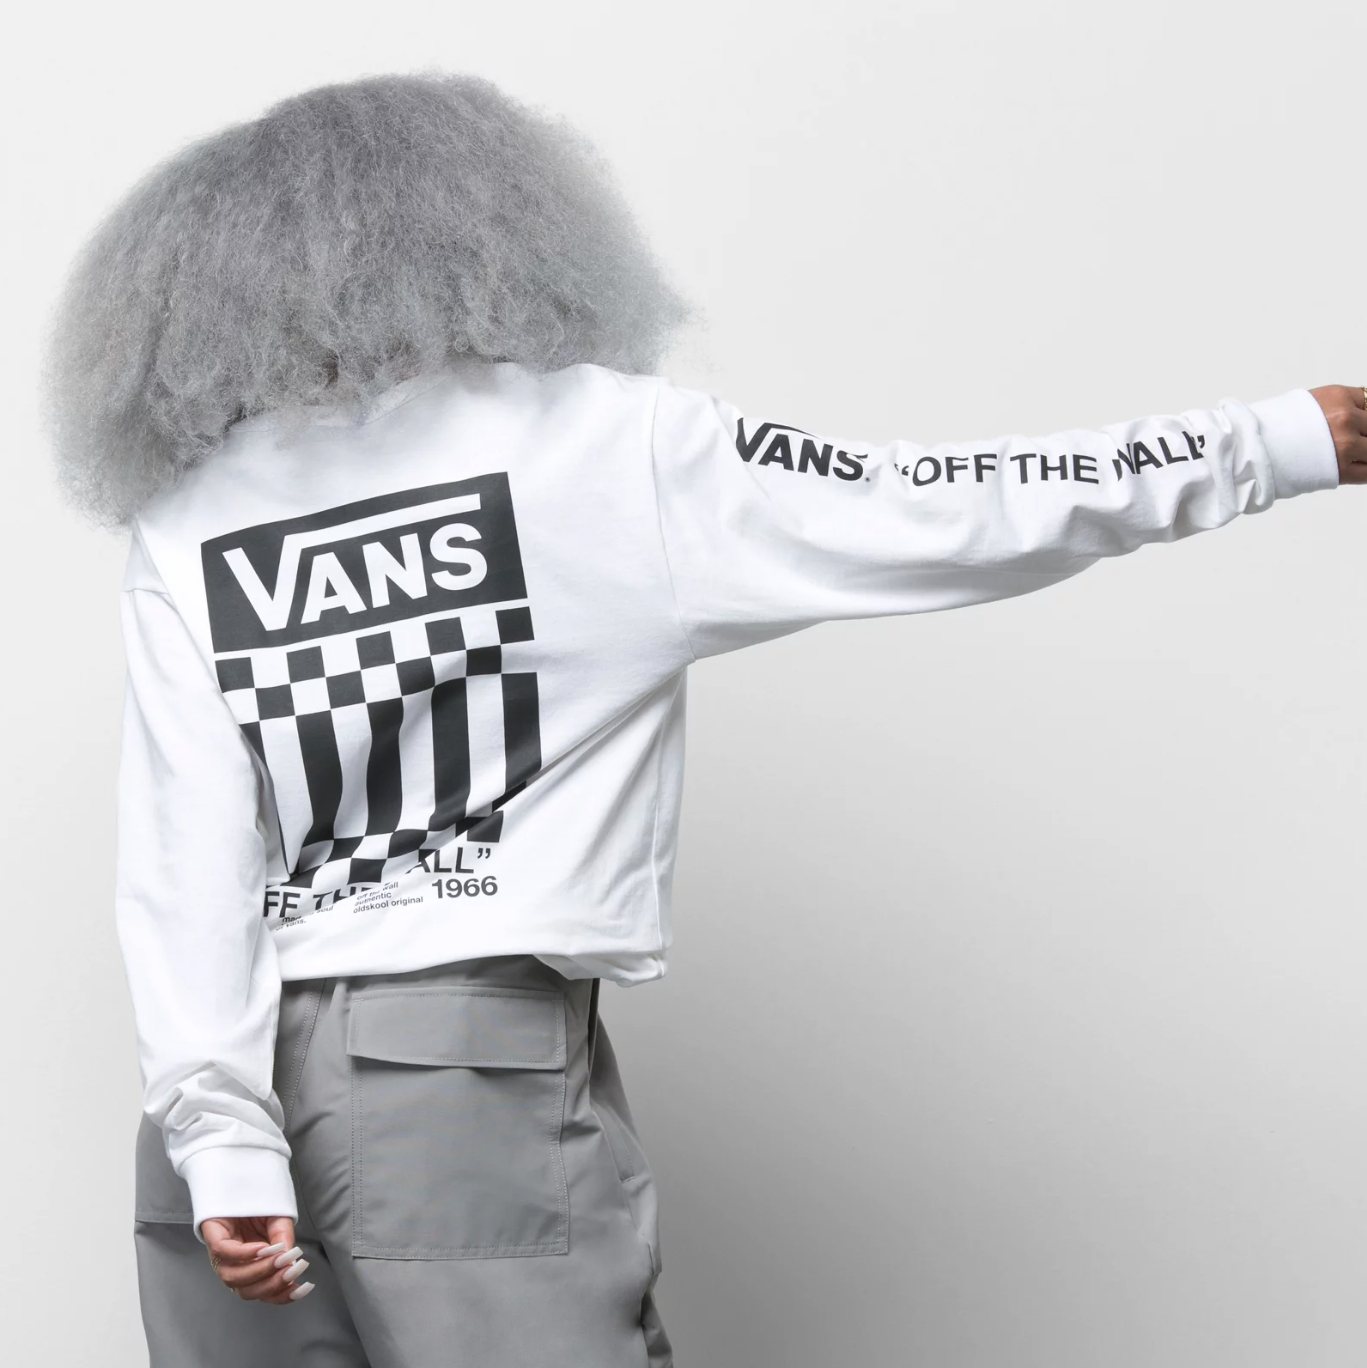 Off The Wall Check Graphic Longsleeve T-shirt